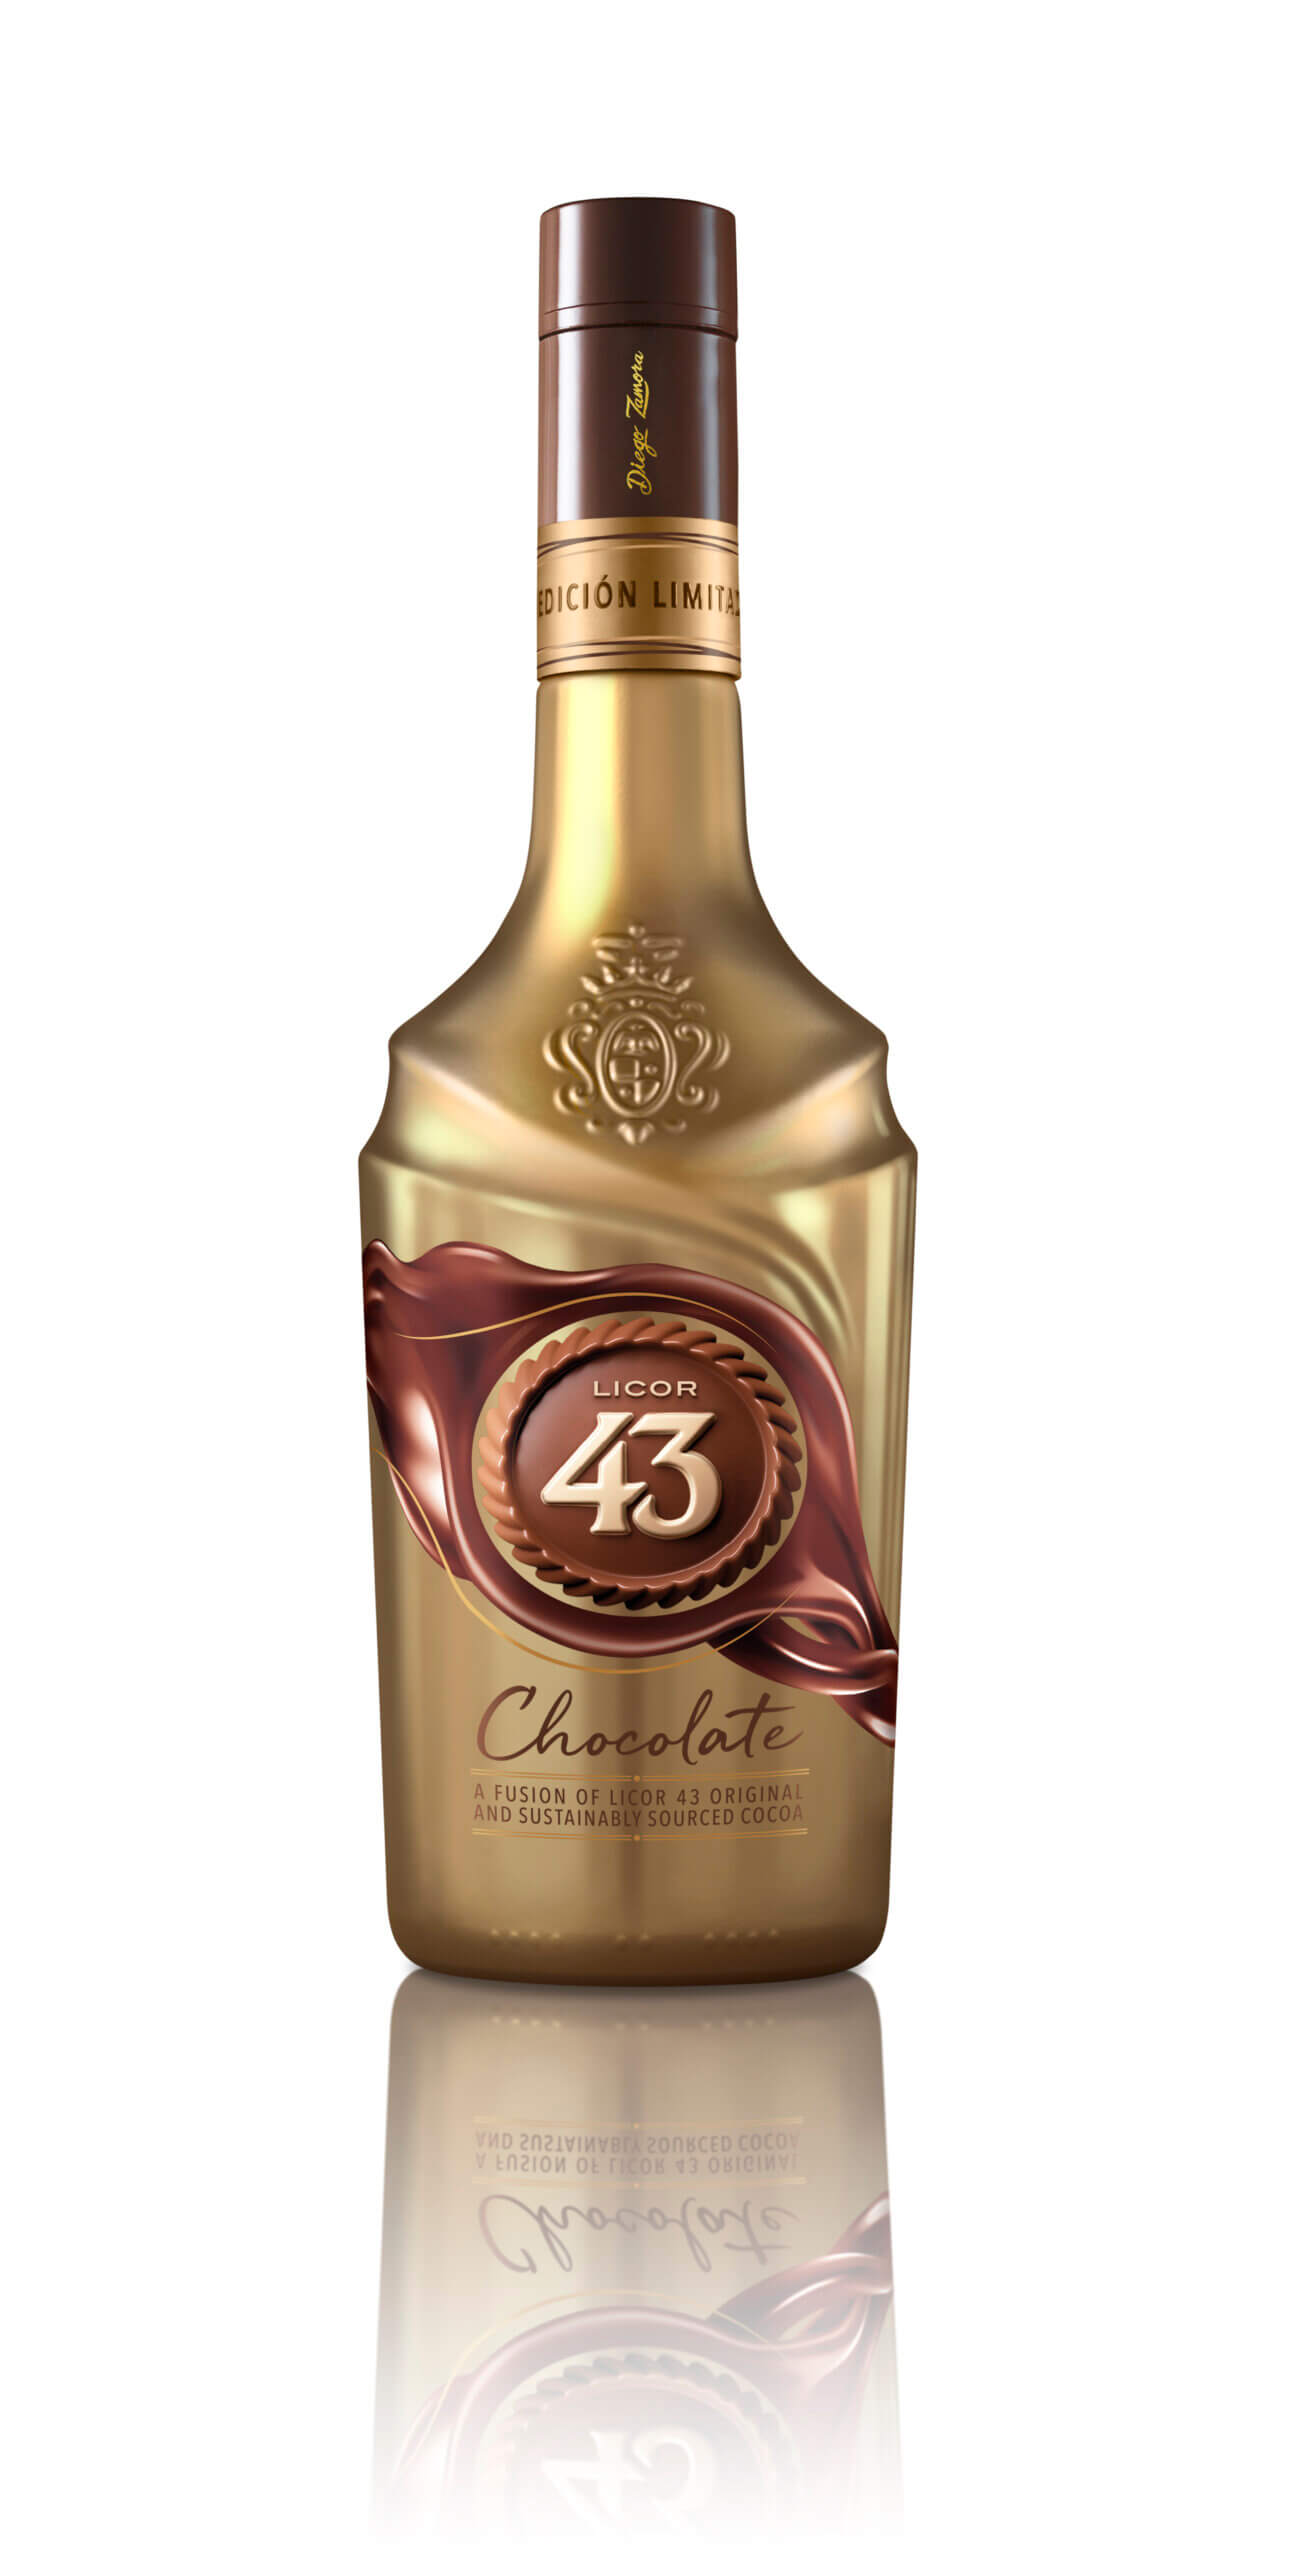 The production of Licor 43